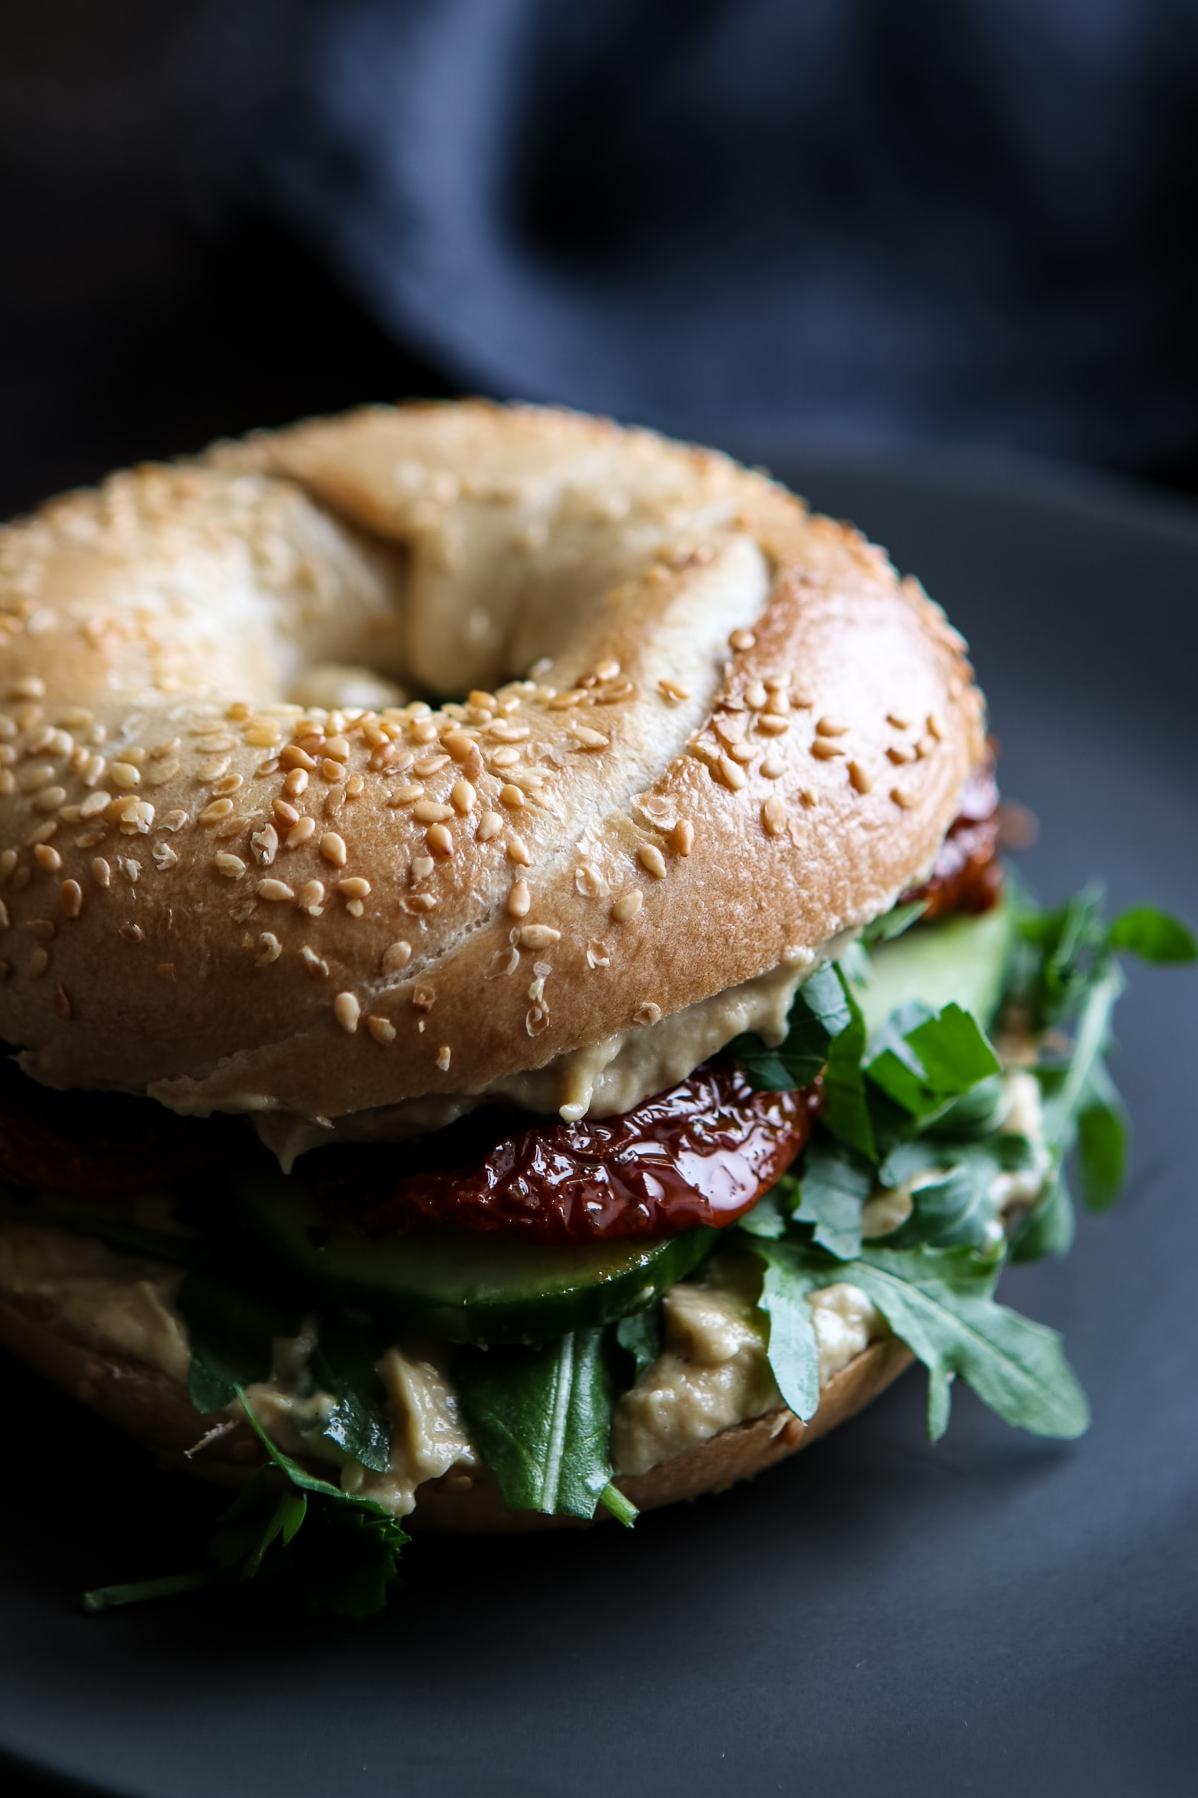  Looking for a healthy and filling lunch? This vegetarian bagel sandwich has got you covered.